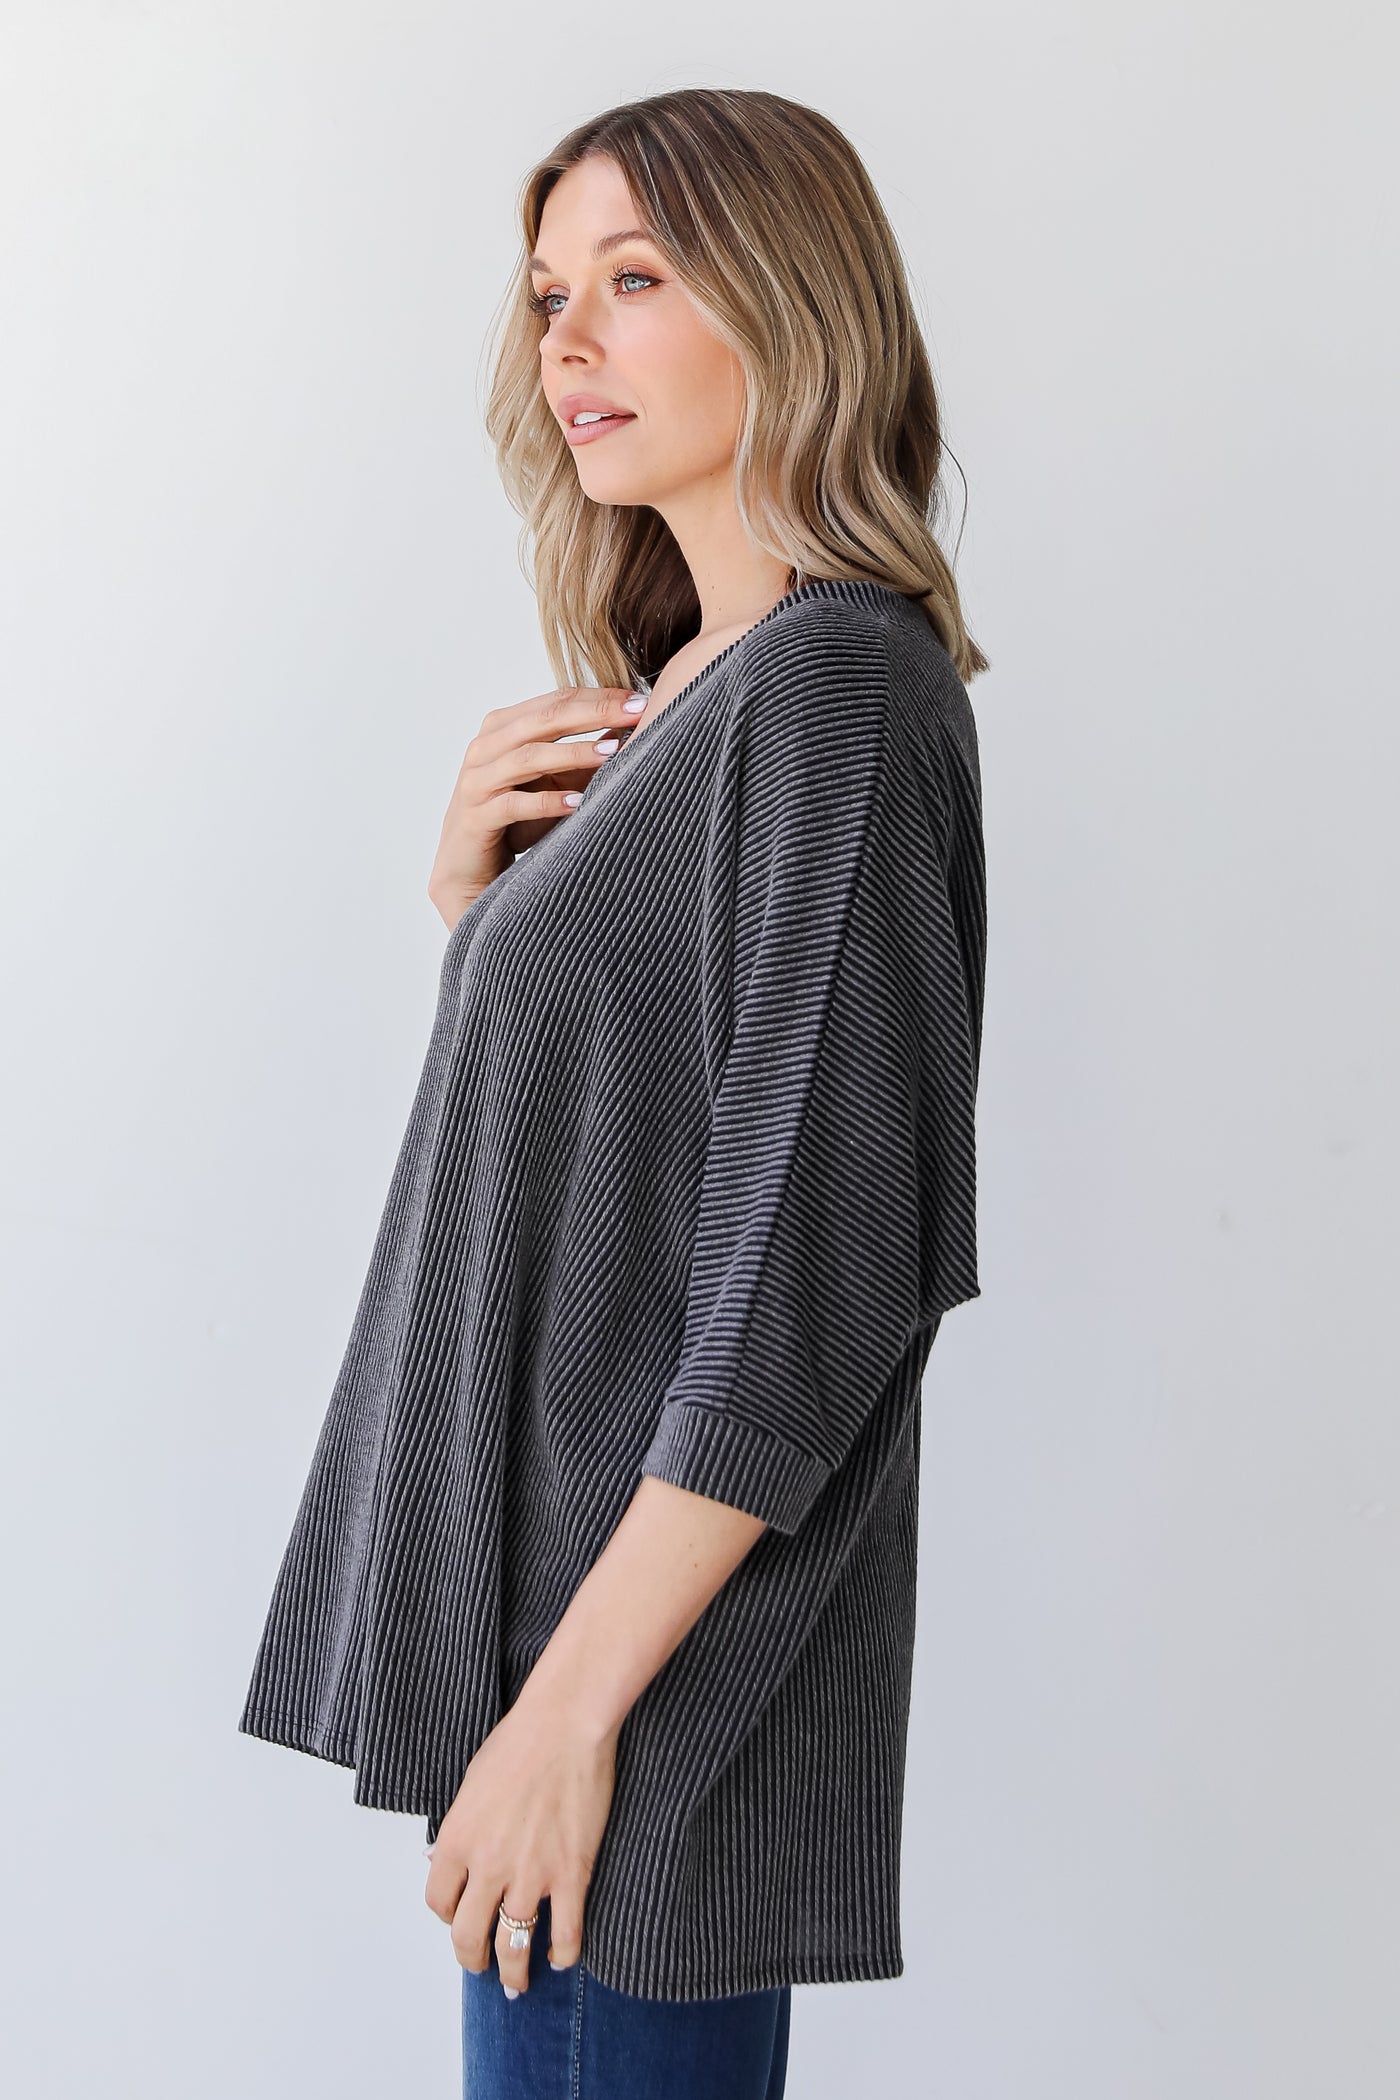 charcoal Corded Tee side view